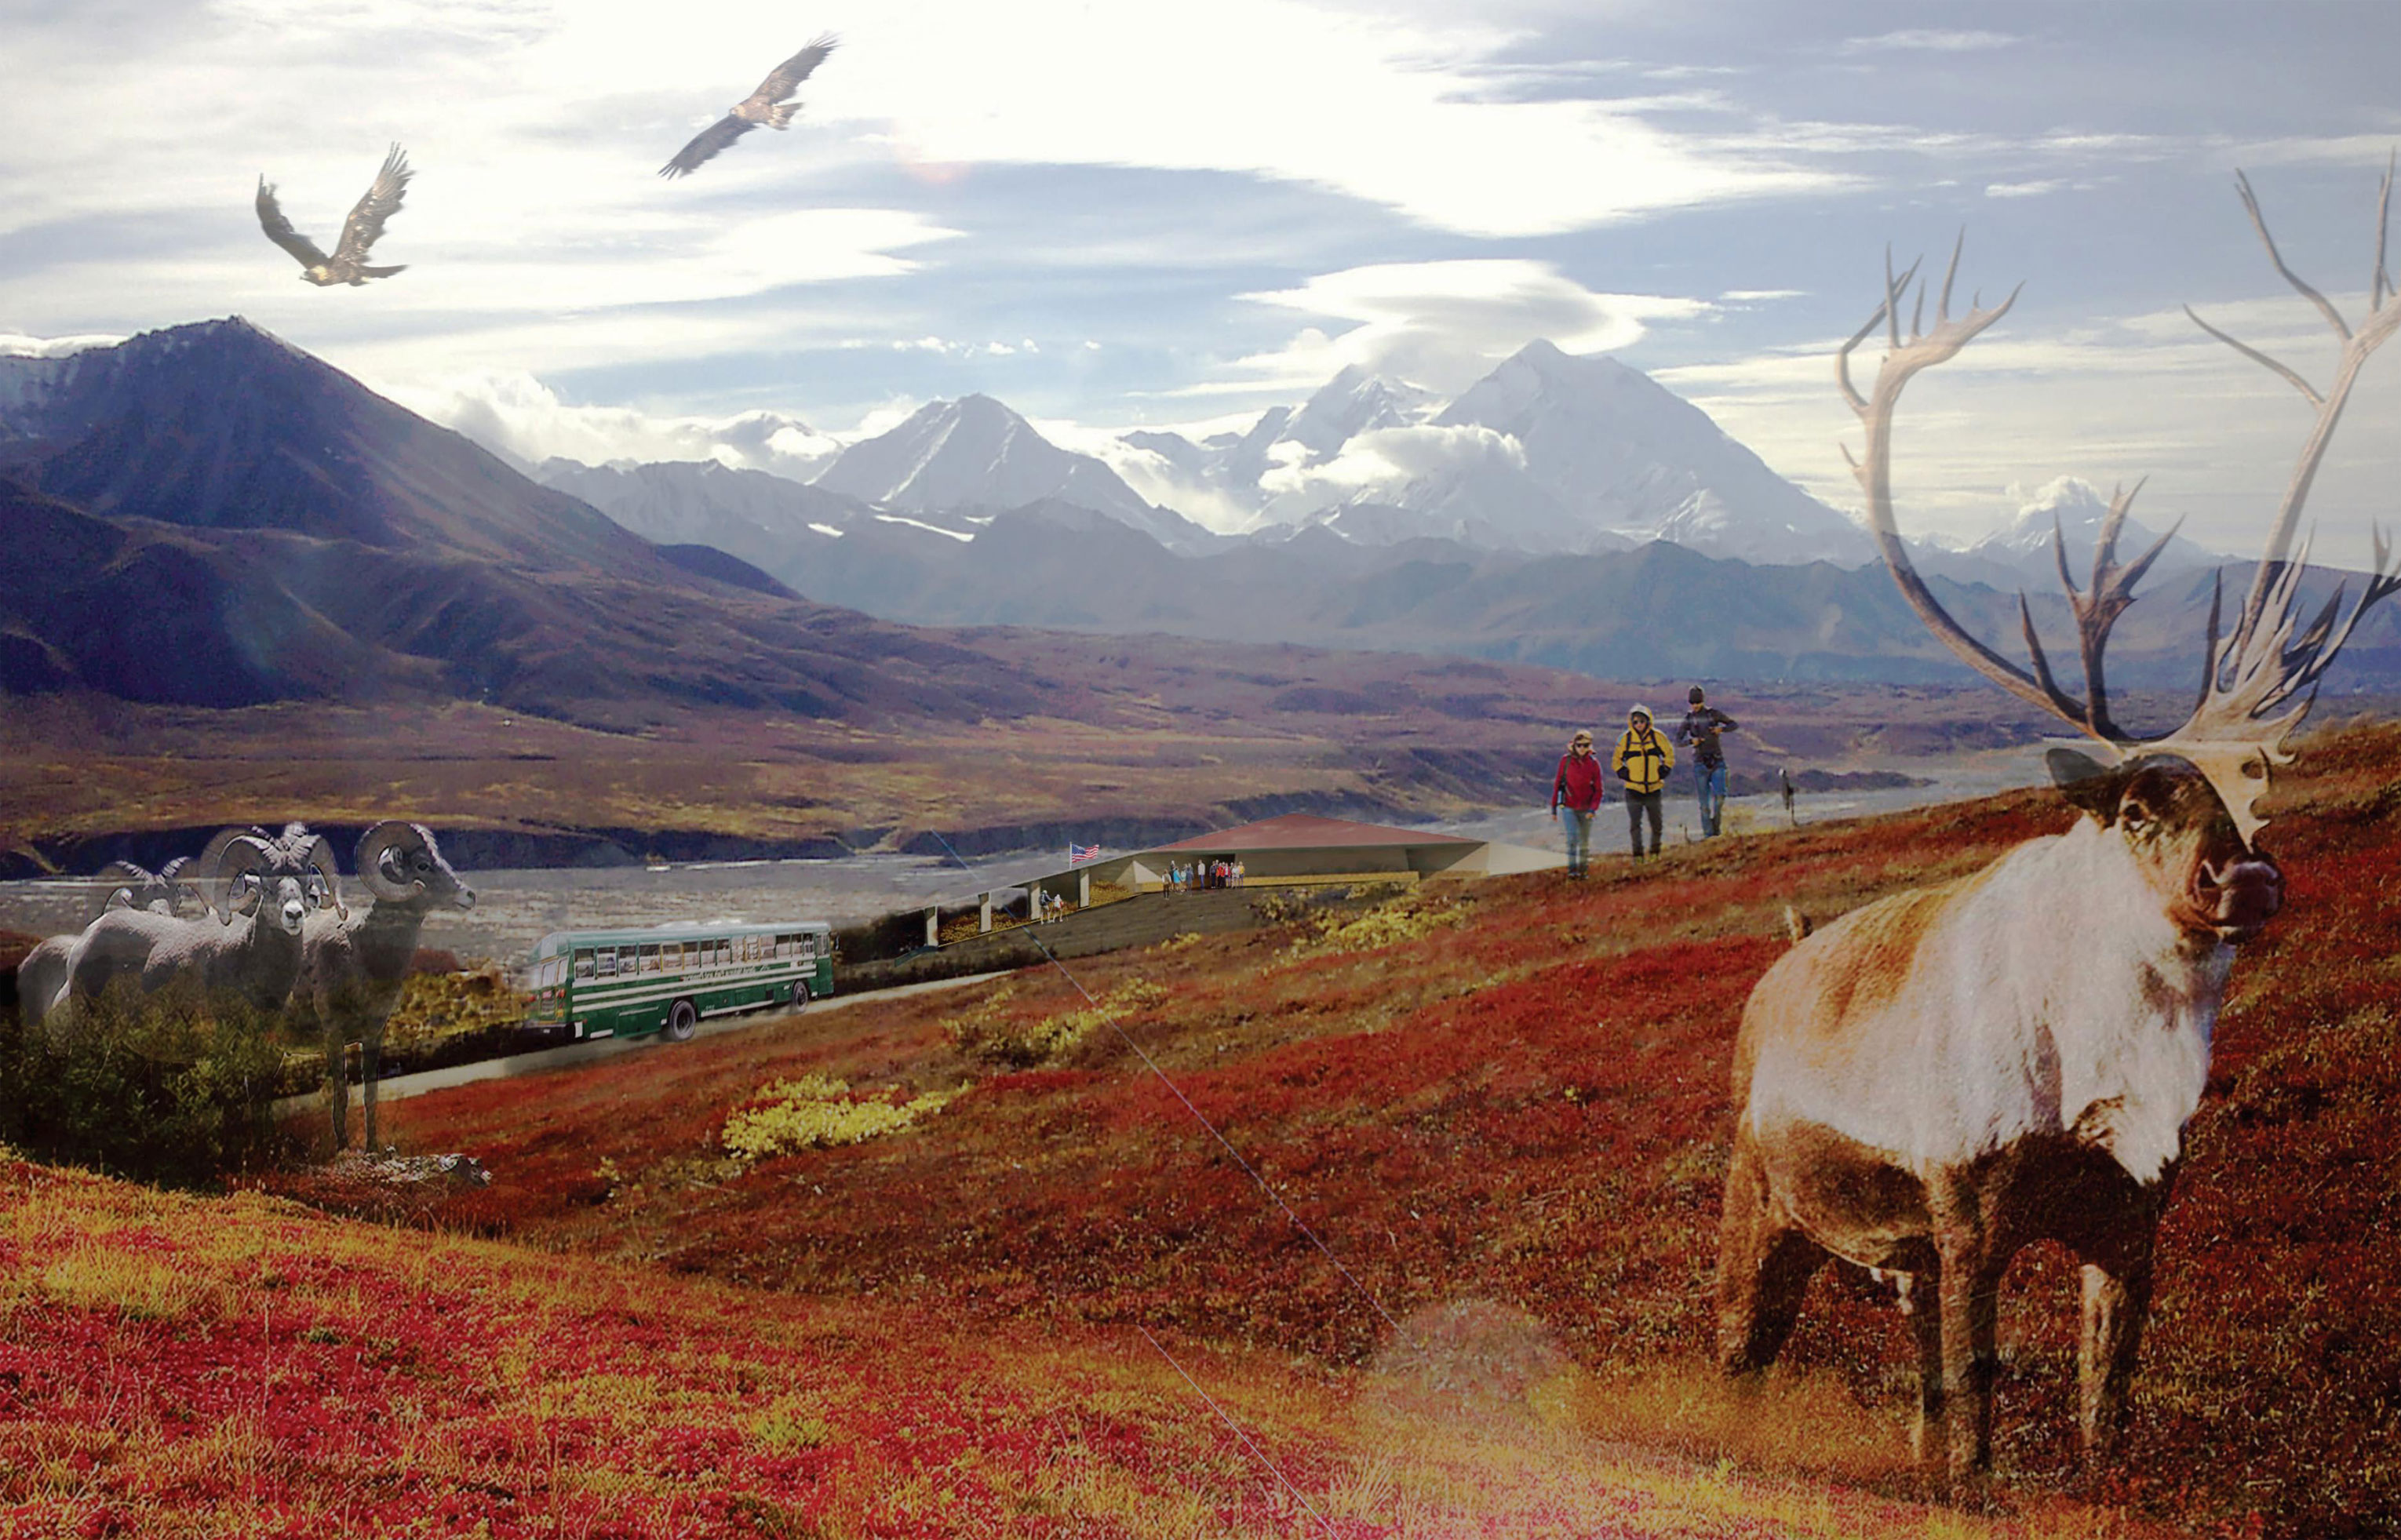 Eielson Visitor Center Roof Redesign. Rendering shows a red-hued meadow with a moose, mountain goats and hikers. In the background is a single story visitor center that blends almost seemlessly into its environment. A mountain range which includes Denali, looms in the distance.